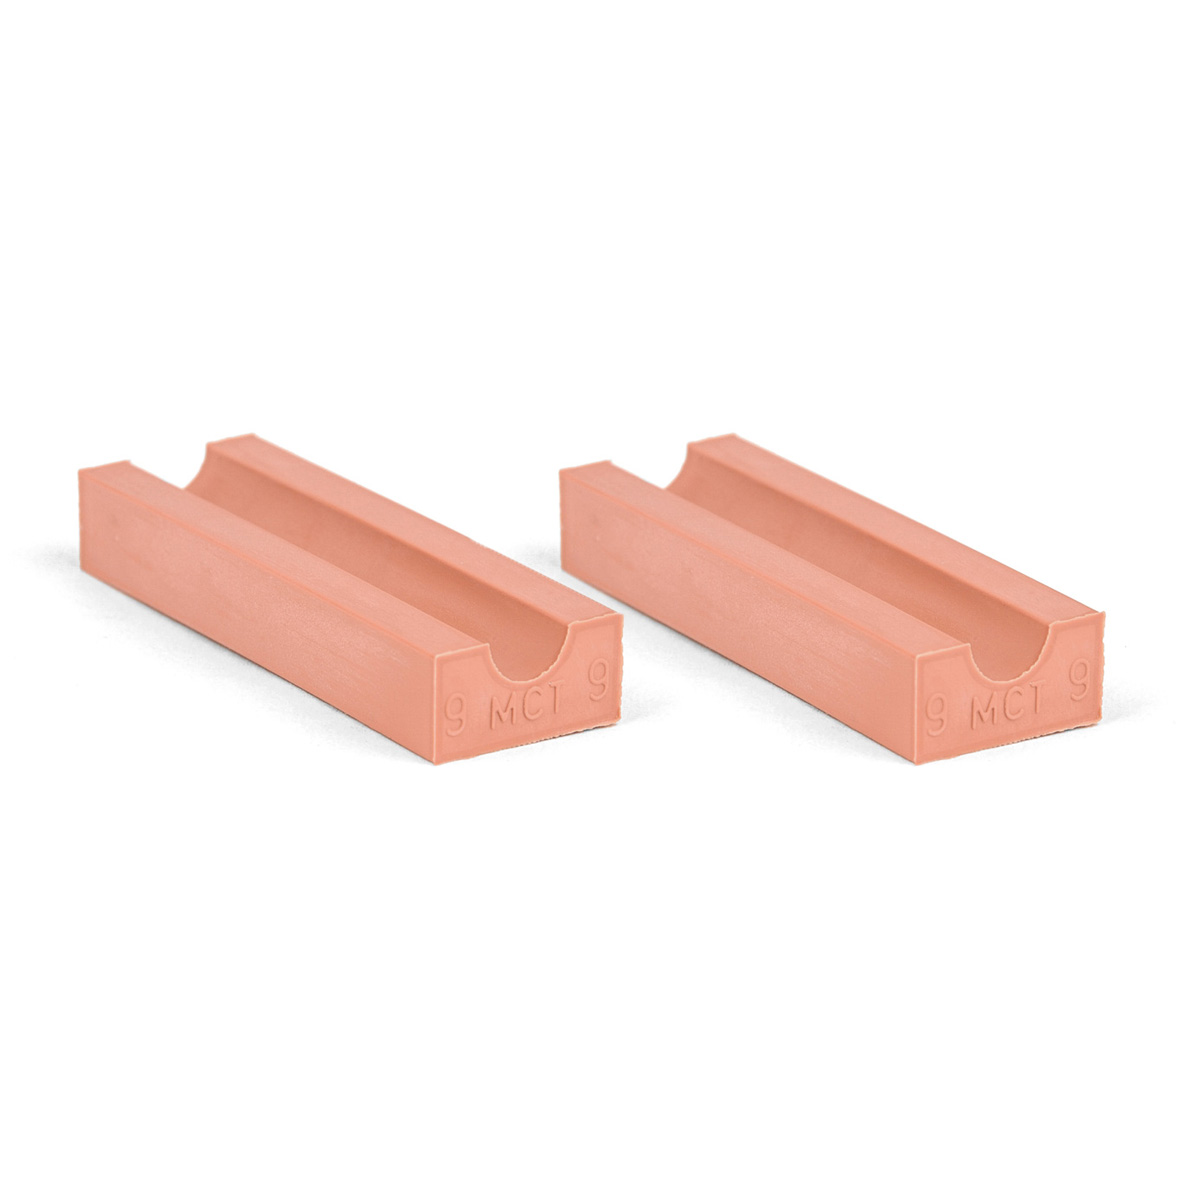 20-09*2 Set of 2 half insert block lycron, 20-09 for cable/pipe diam. 8.5-9.5mm